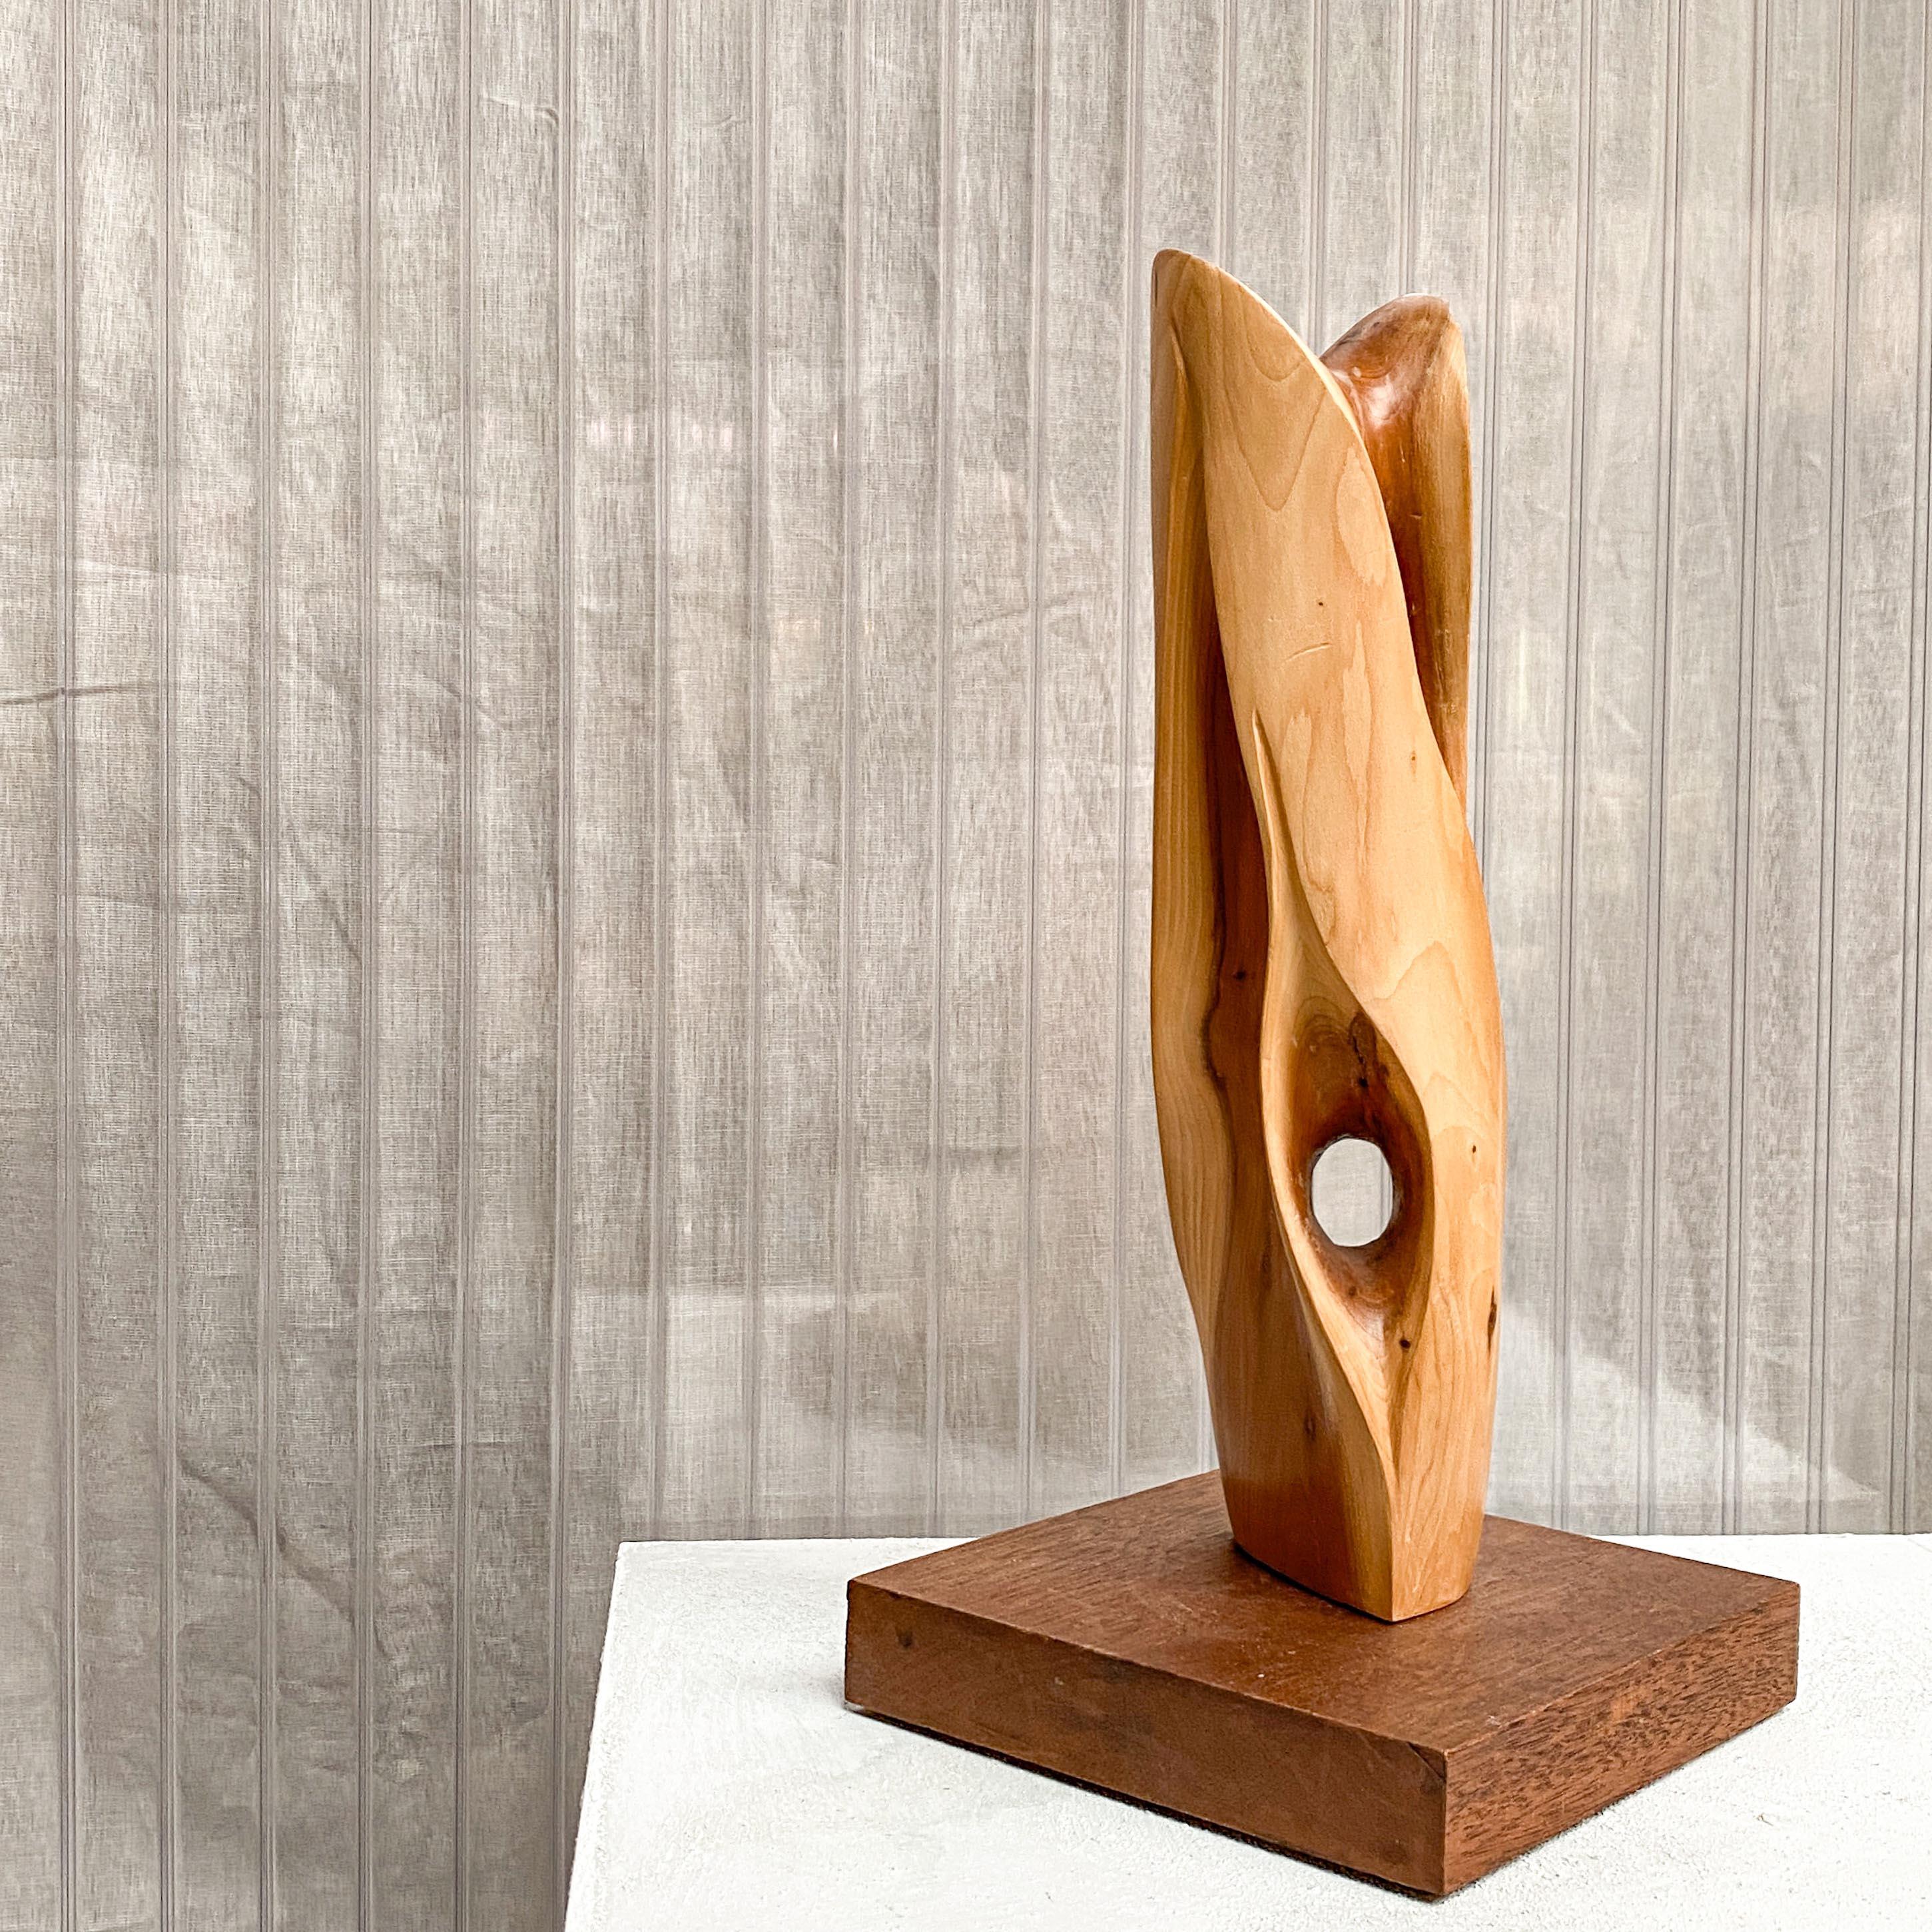 20th Century Modernist Wooden Sculpture in Abstract Intricate TOTEM Shape on a Wooden Base For Sale